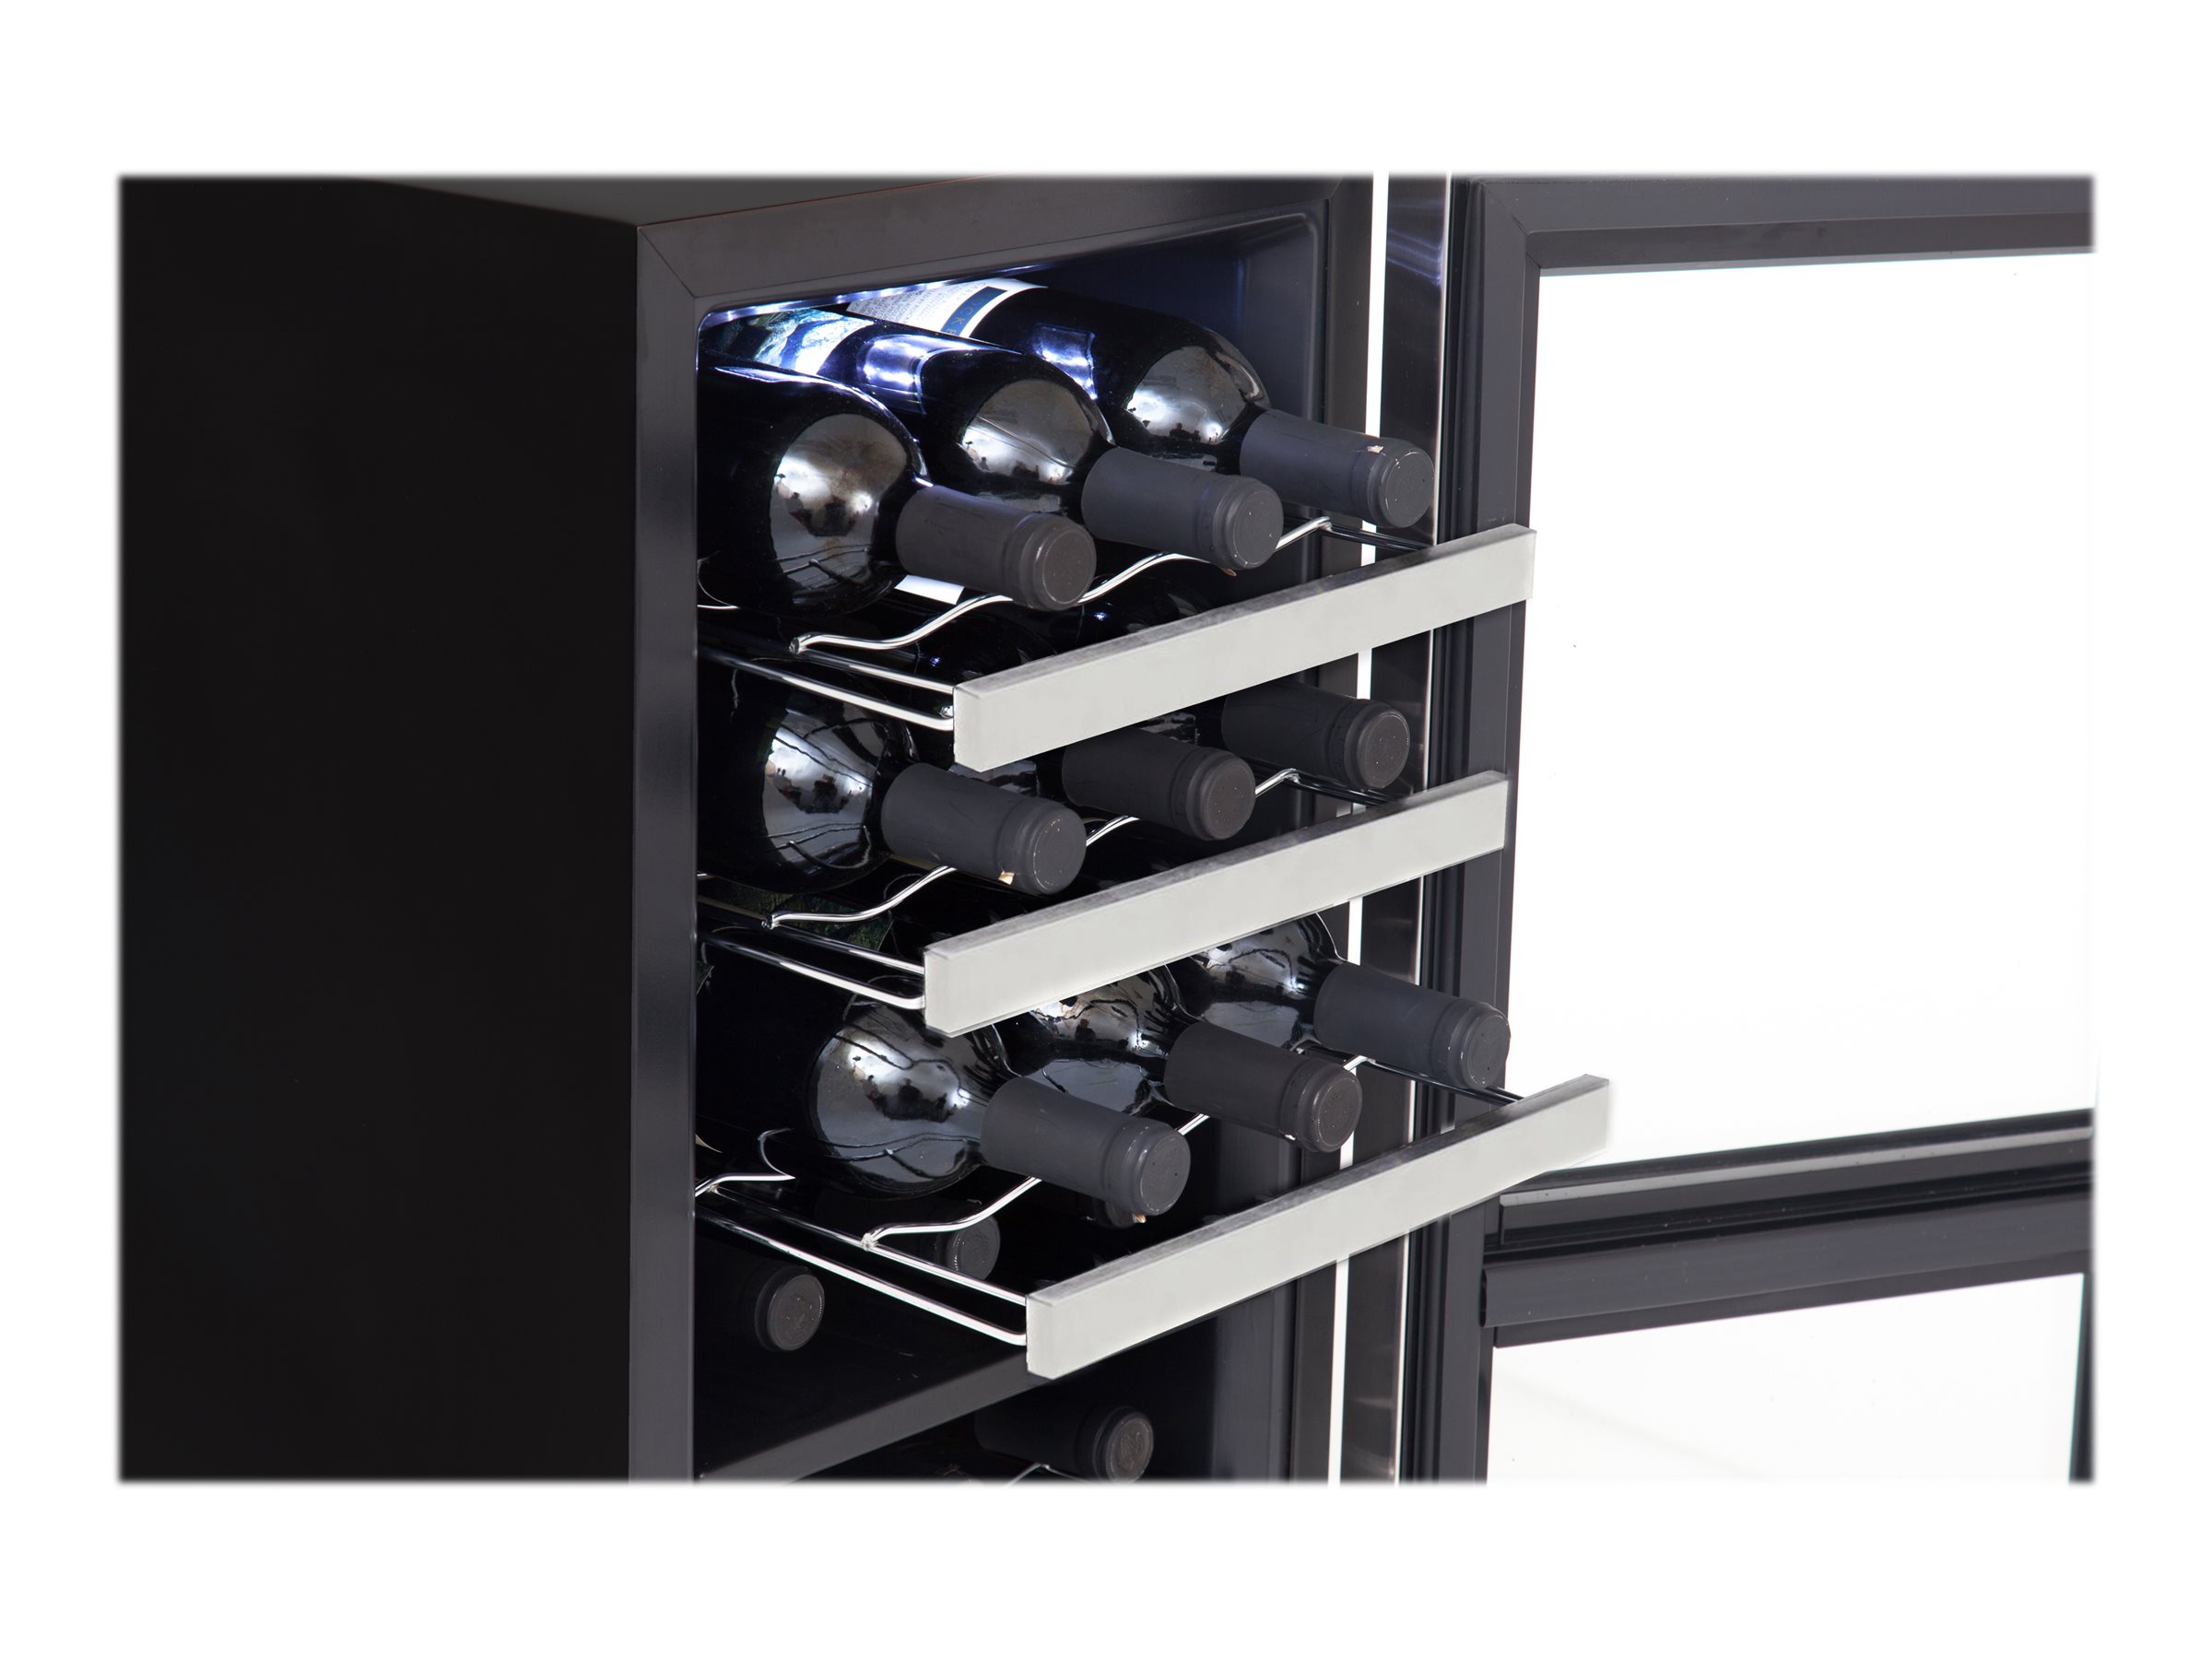 Whynter WC-241DS - Wine cooler - width: 14 in - depth: 20.2 in - height: 33.5 in - image 5 of 6